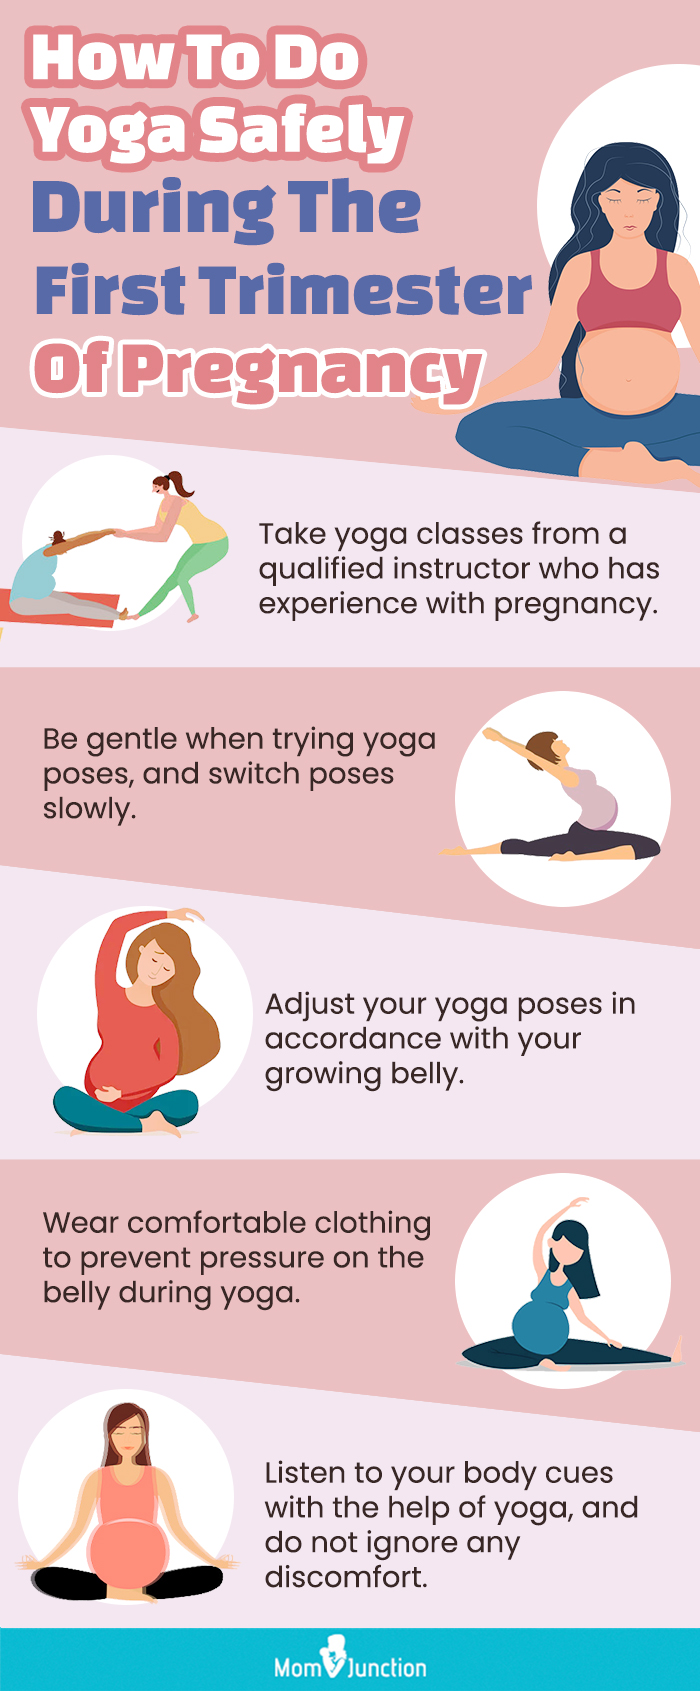 What about yoga? Is it helping for pregnant women or after delivery? - Quora